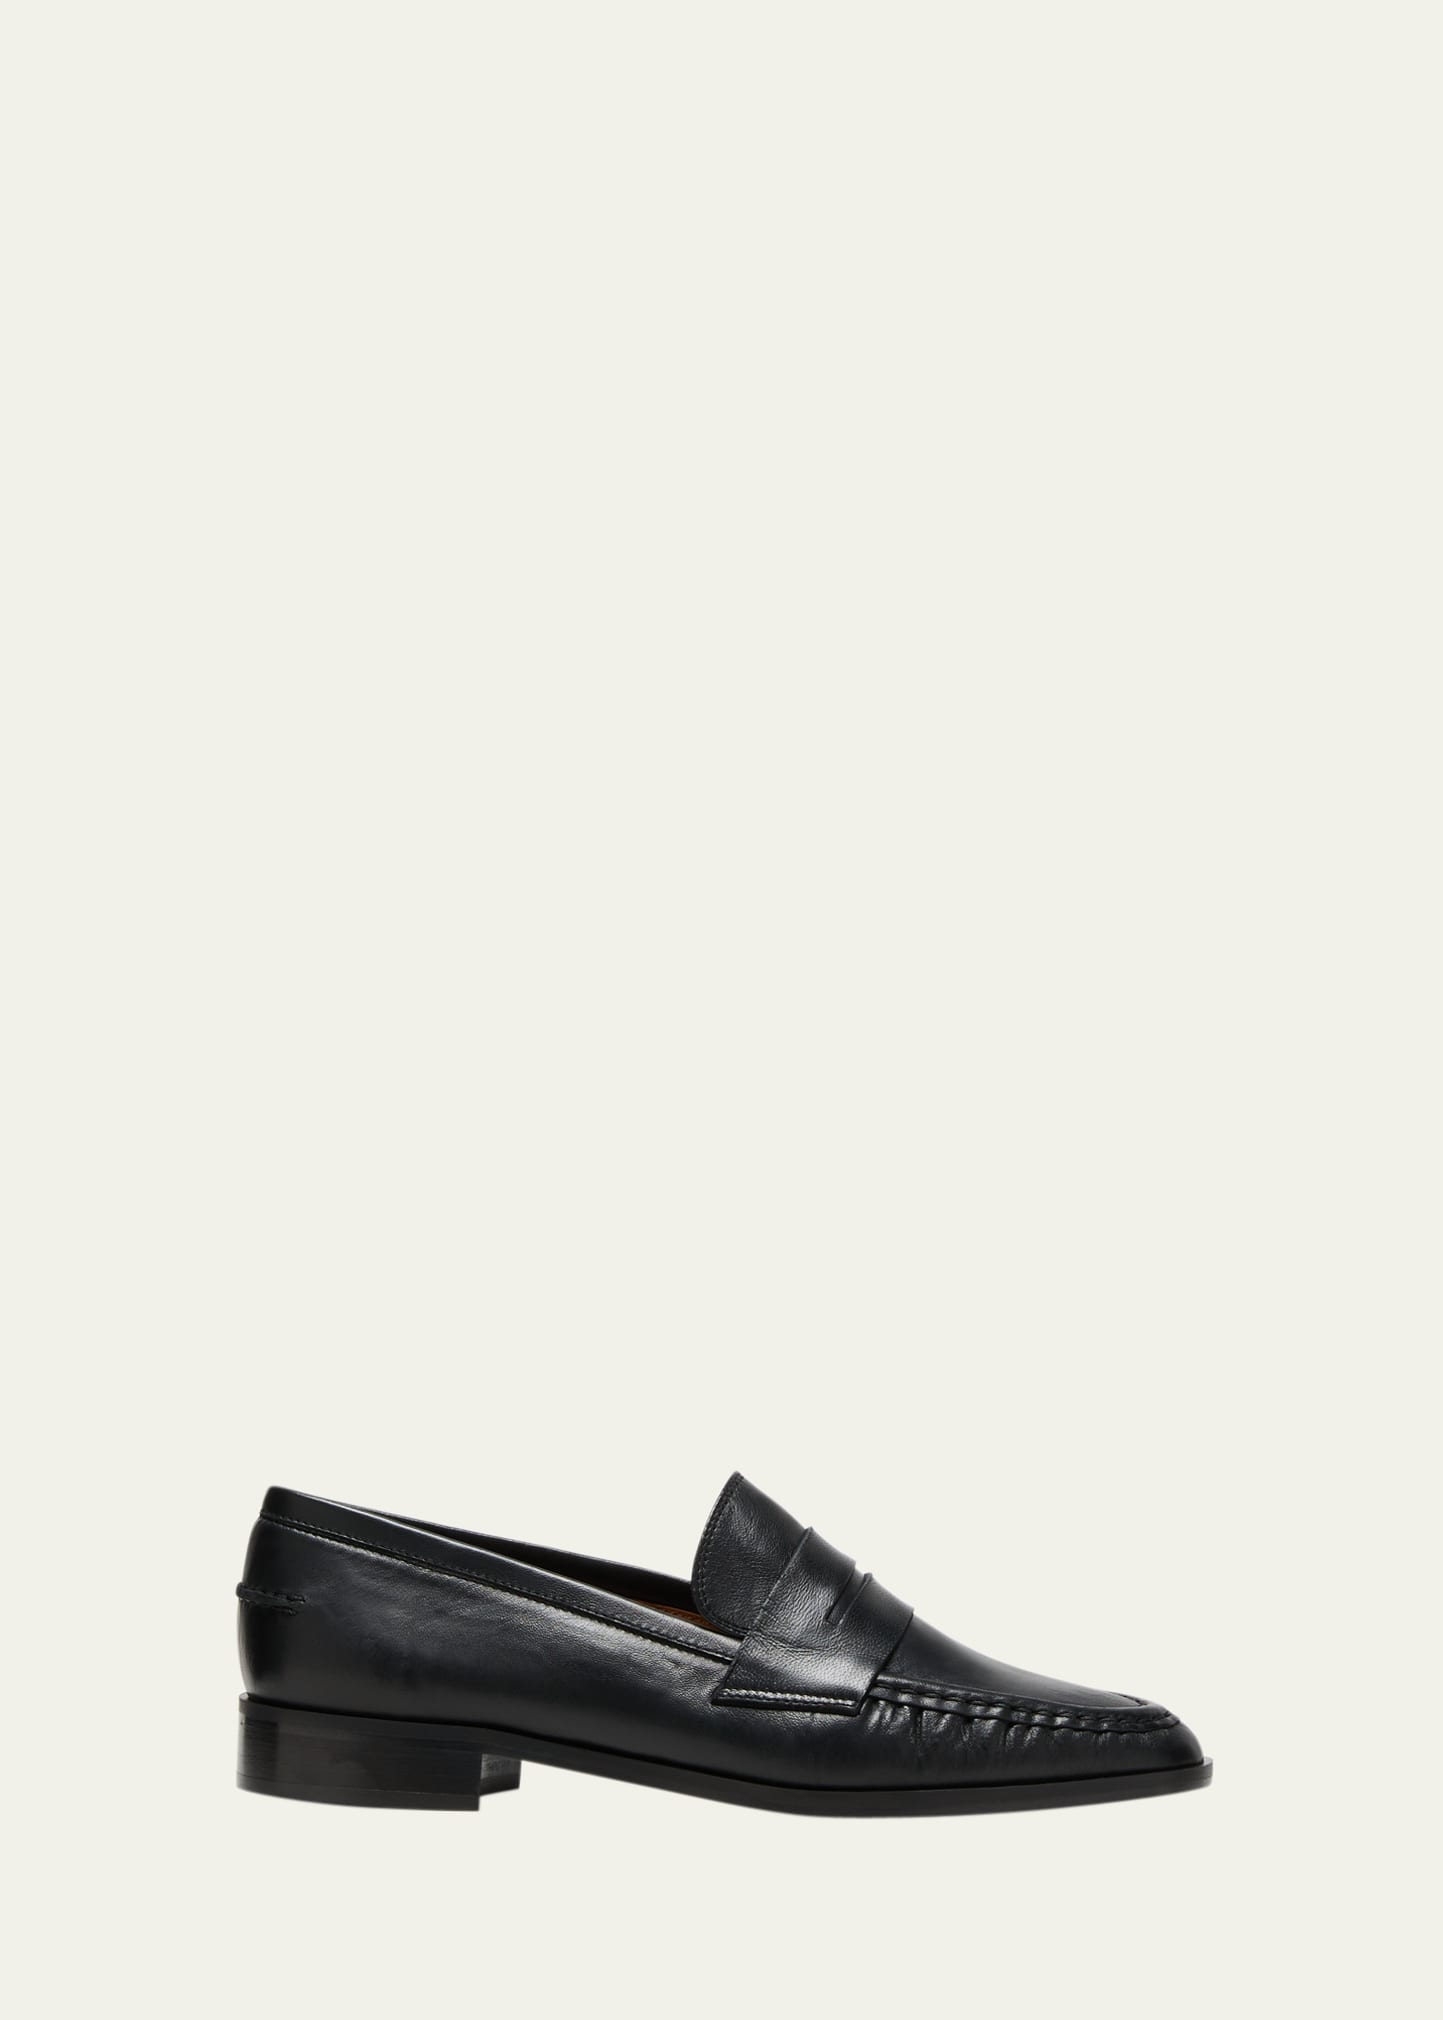 Airola Napa Leather Penny Loafers